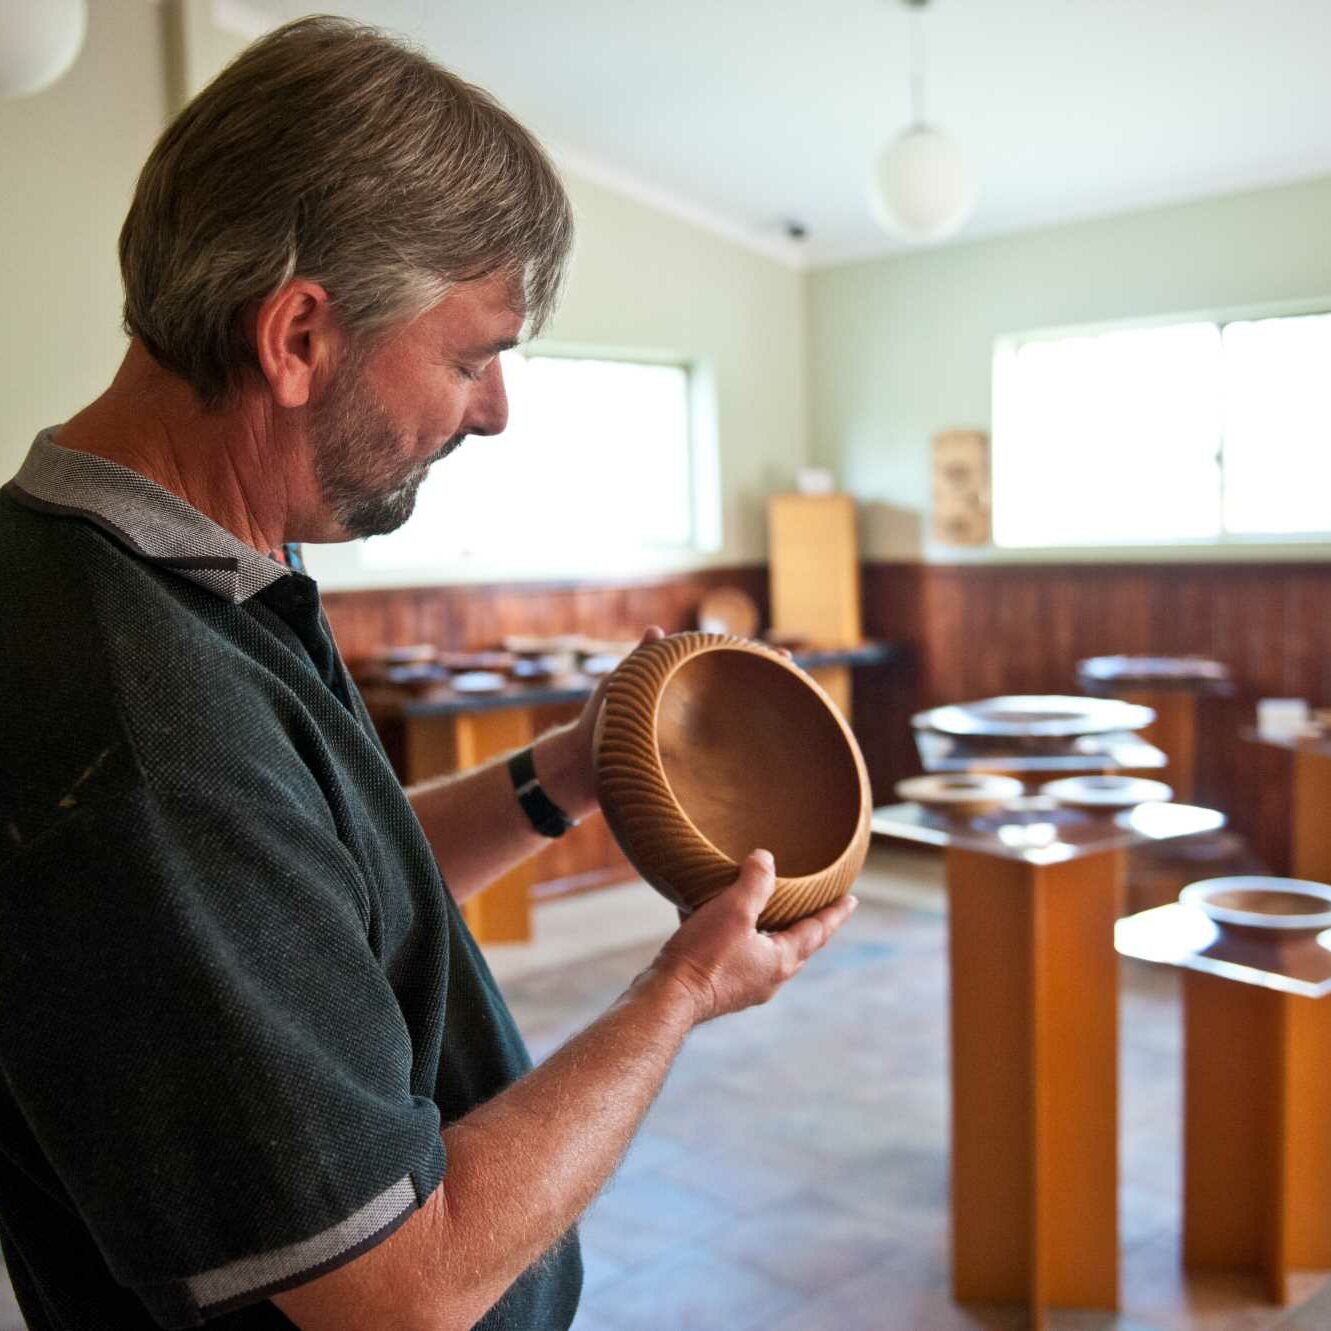 The Wood We Create Gallery: Craftsmen David Barden and some of his wares.
Photo: Rob Wright / The Coffs Coast Advocate